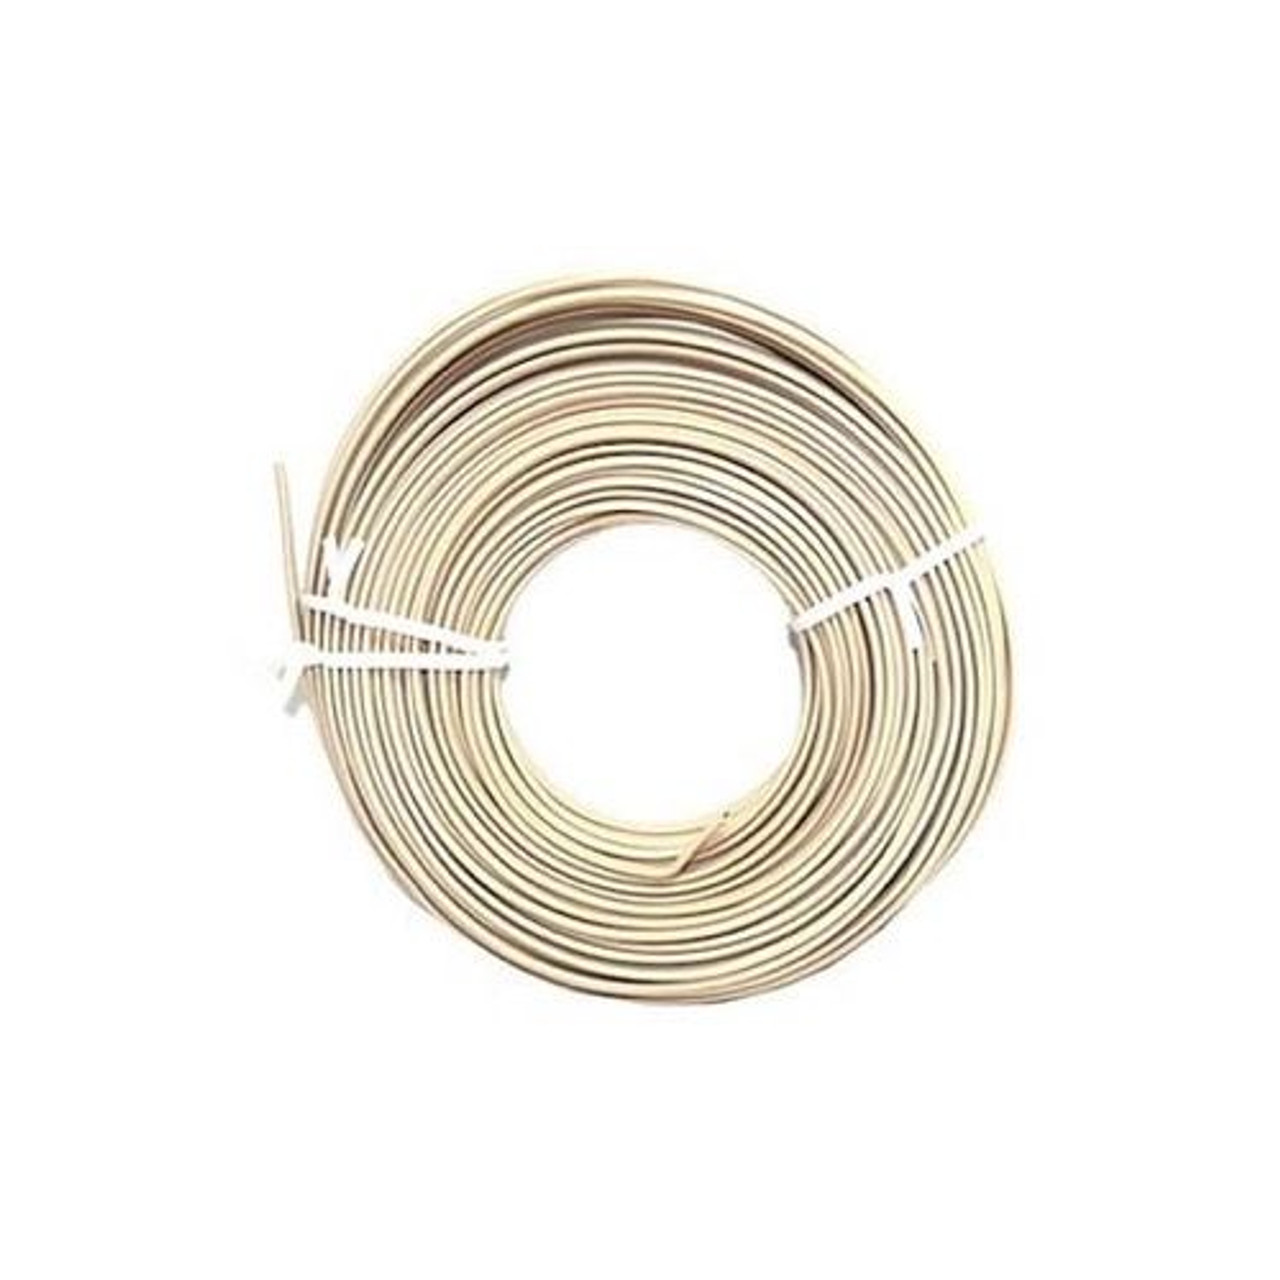 Eagle 100 FT Telephone Cable Cord 24 AWG 4 Conductor Solid Copper Round Gauge 4 Conductor Phone Cable Line Modular Standard Round Wire 24-4 Data Audio Signal Transfer Telephone Extension Cable, Bulk Roll